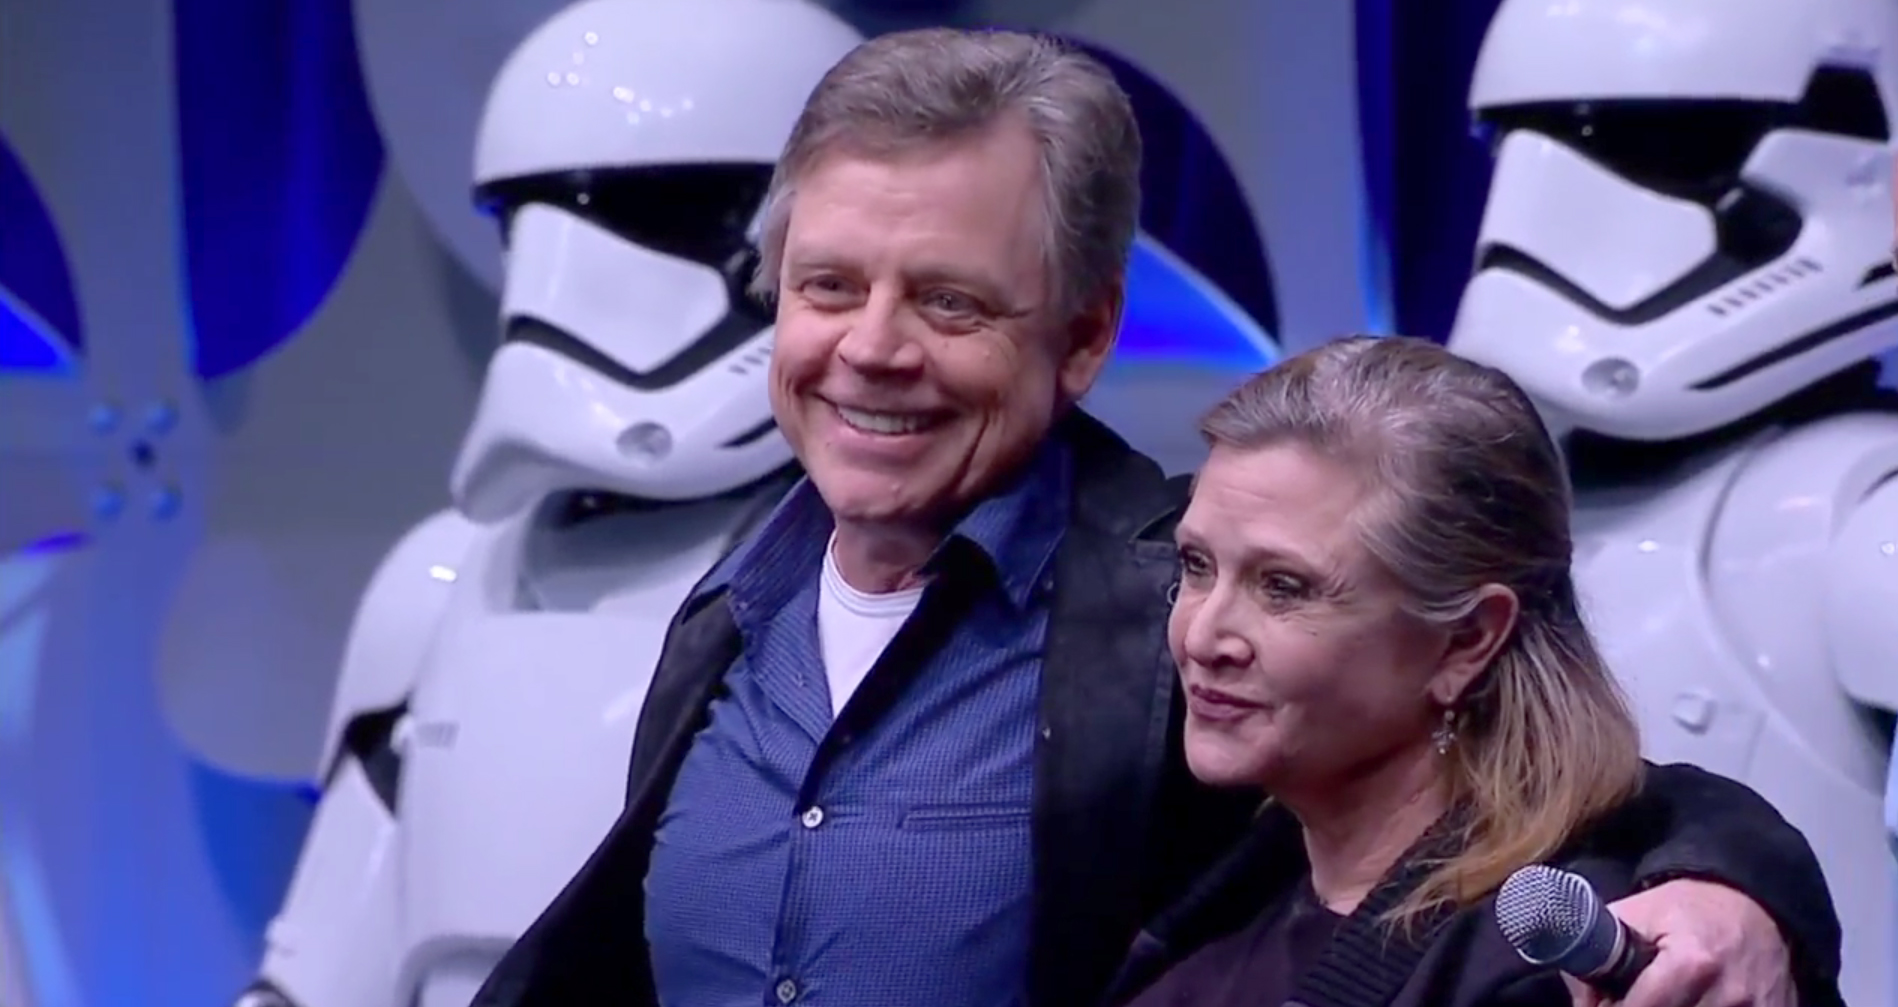 PHOTO: Mark Hamill and Carrie Fischer at the Star Wars: The Force Awakens panel discussion during Star Wars Celebration Anaheim, April 16, 2015.